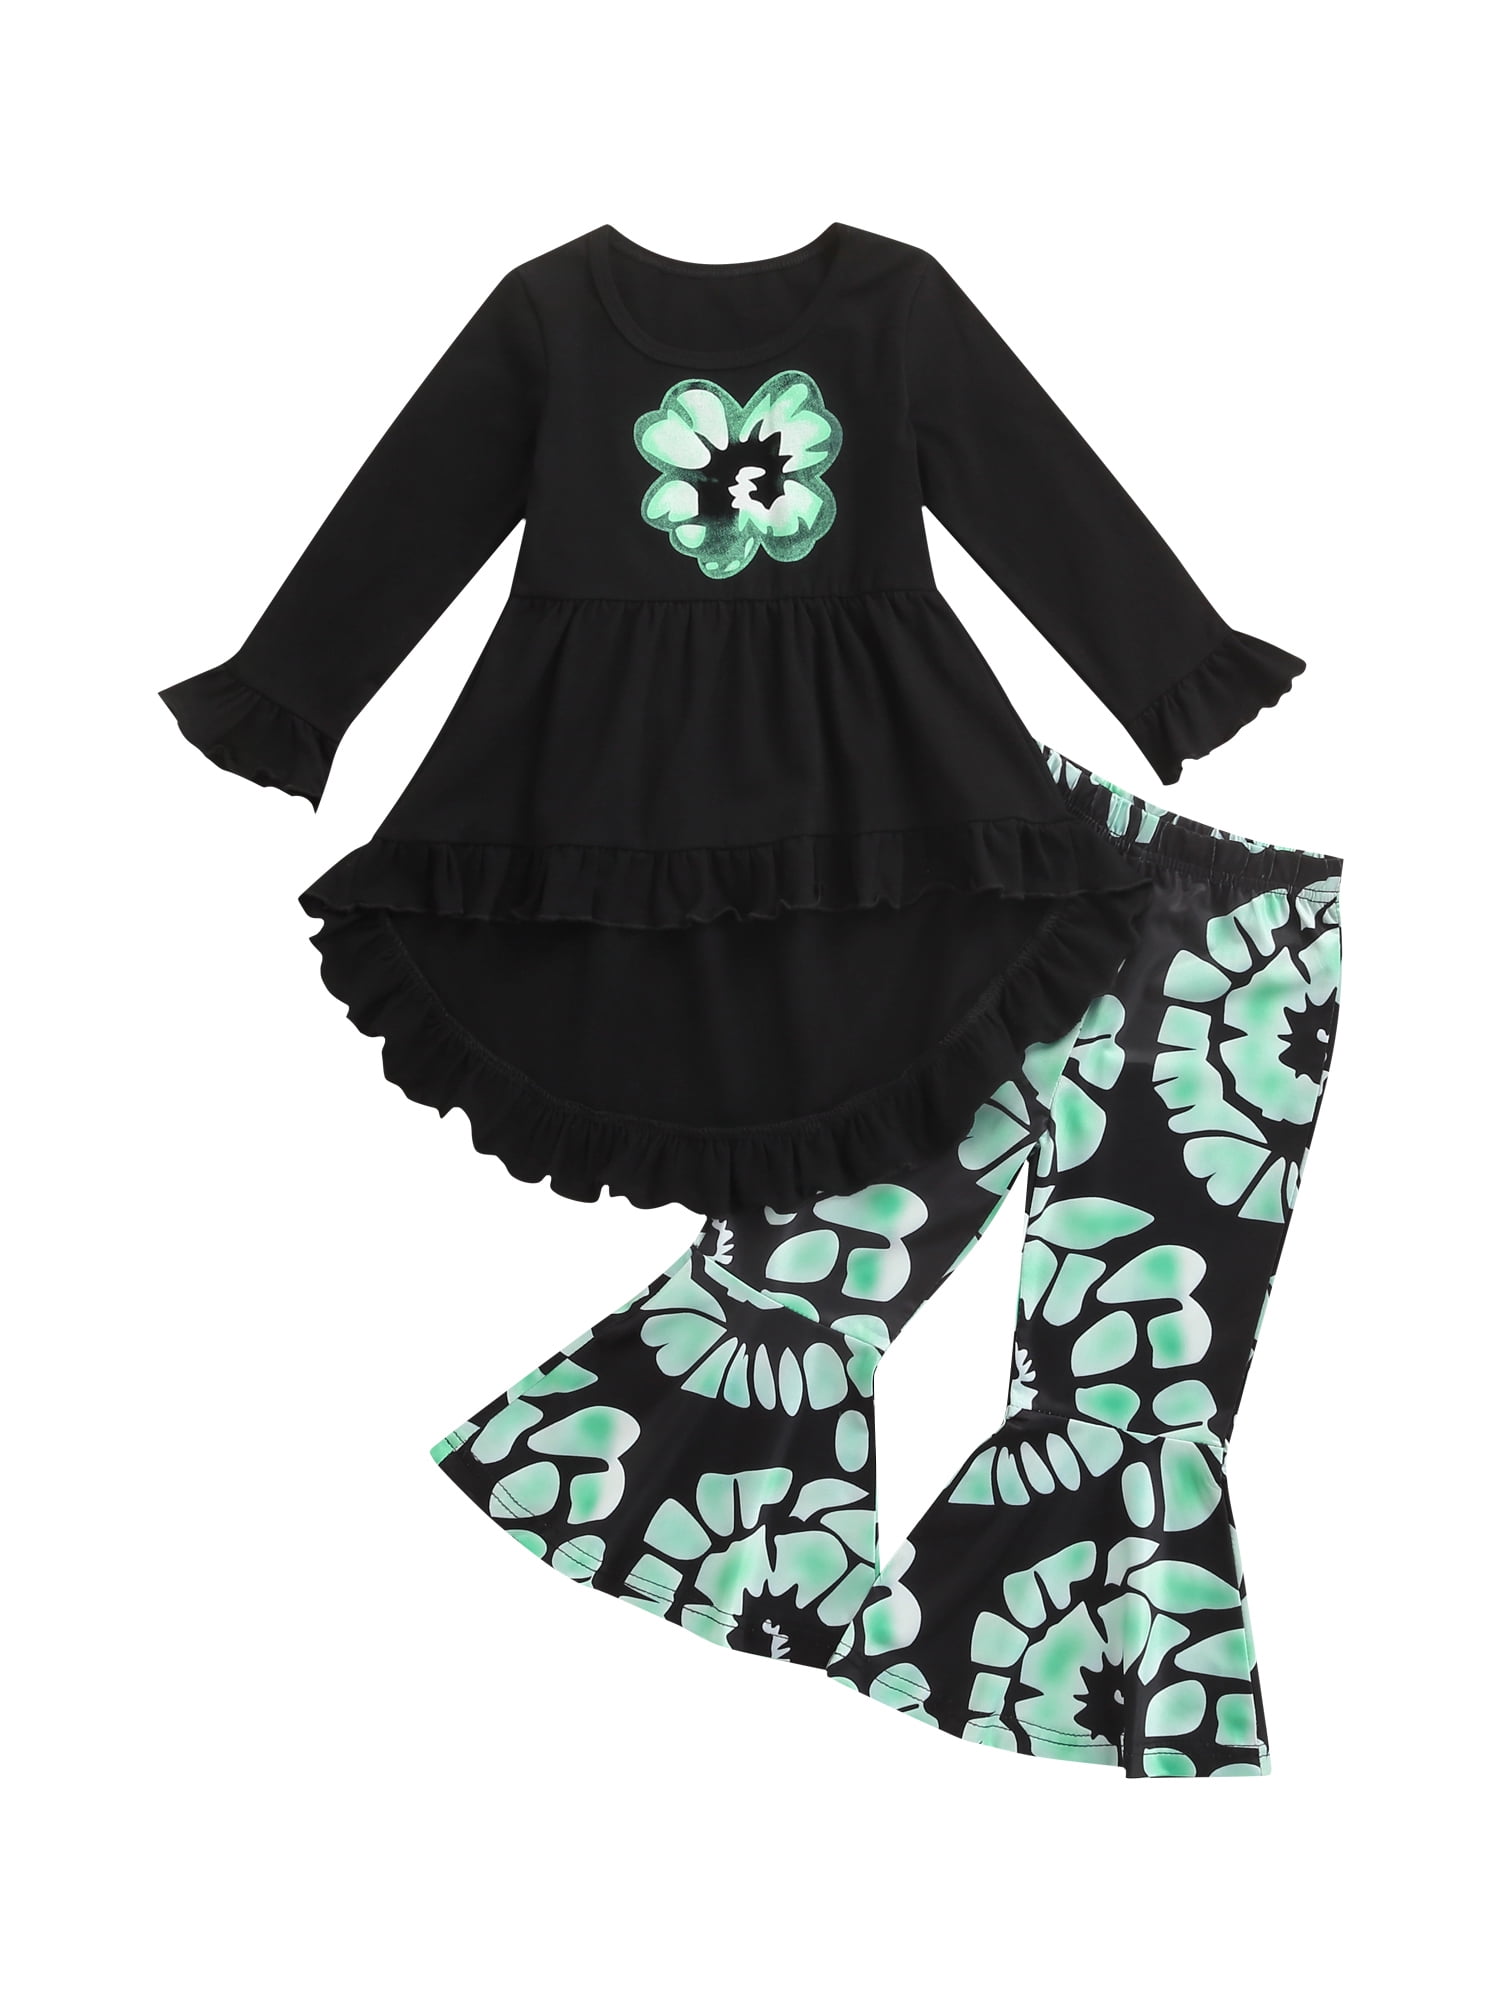 Toddler Baby Girls St.Patrick's Day Outfit Long Sleeve Polka Dot Tutu Skirt Princess Party Dress Spring Fall Clothes Set